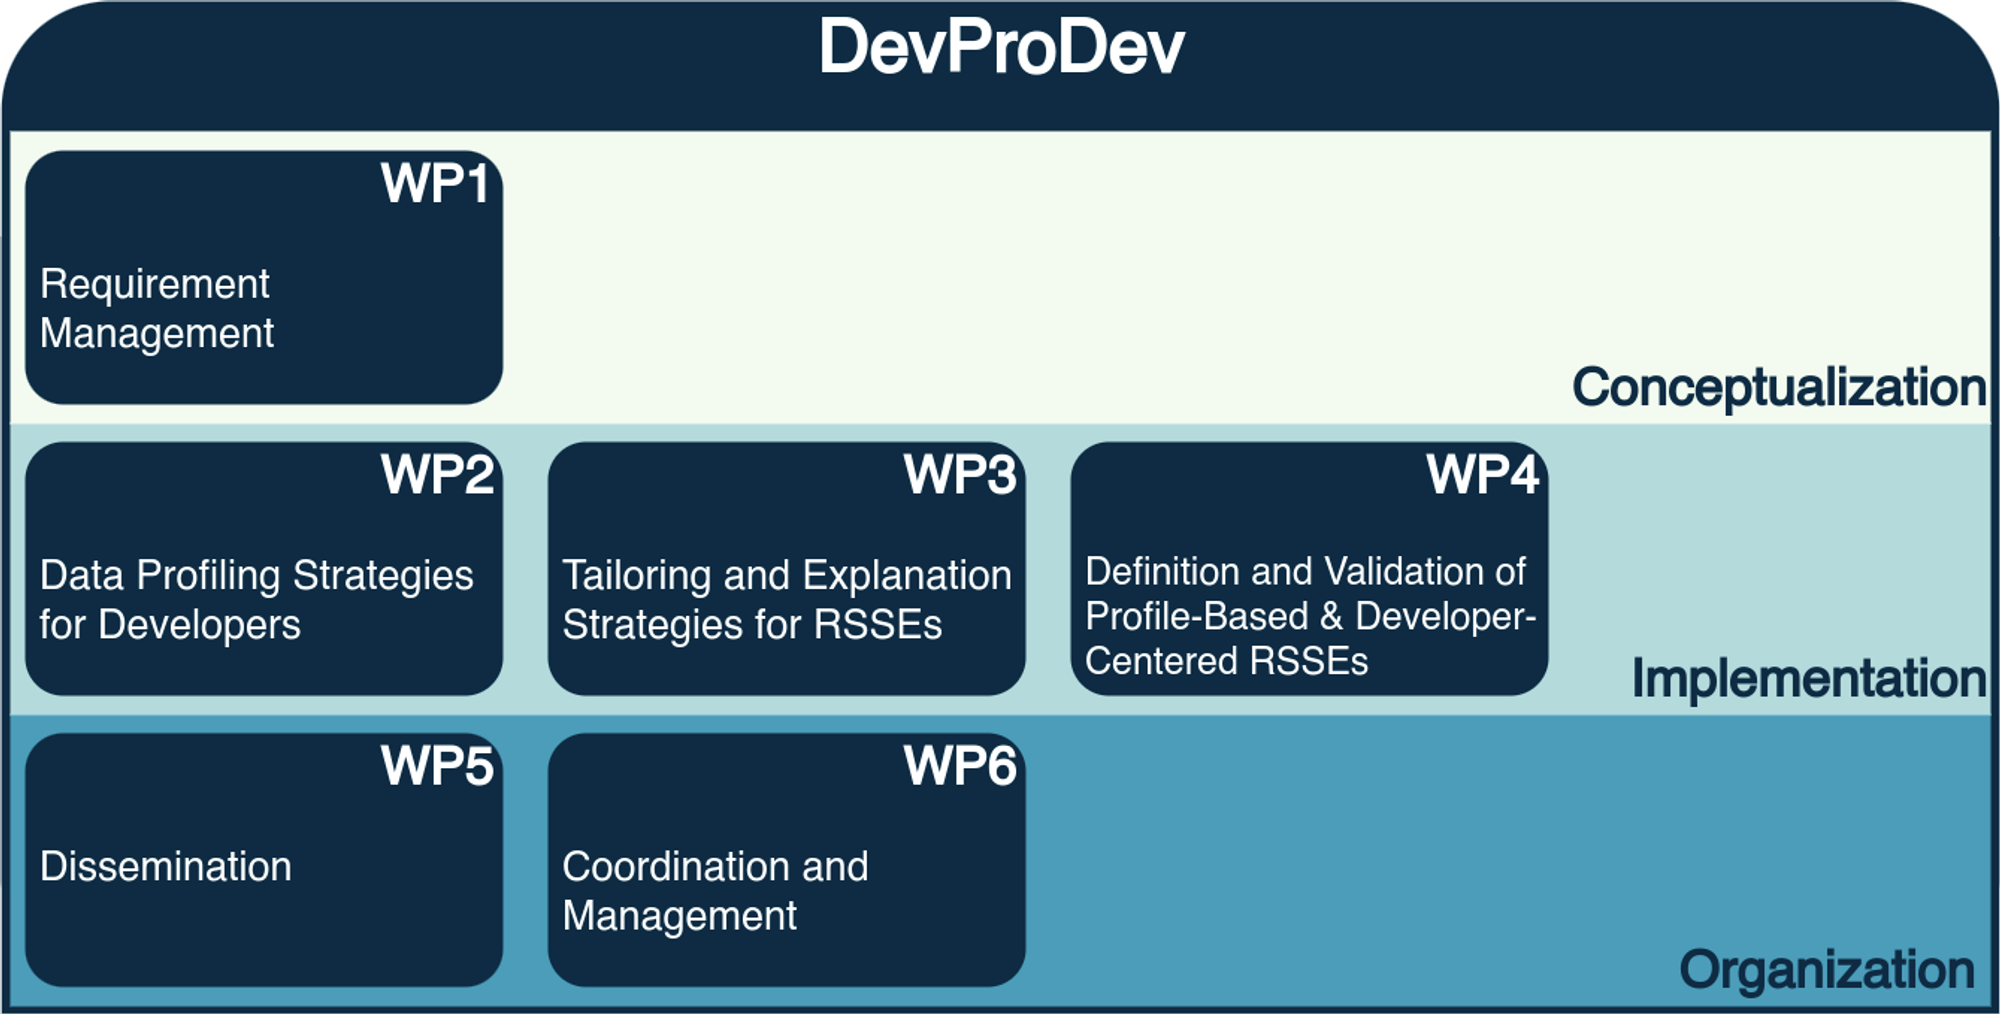 The Work packages of the DevProDev project are subdivided into three steps: conceptualization, implementation, and organization